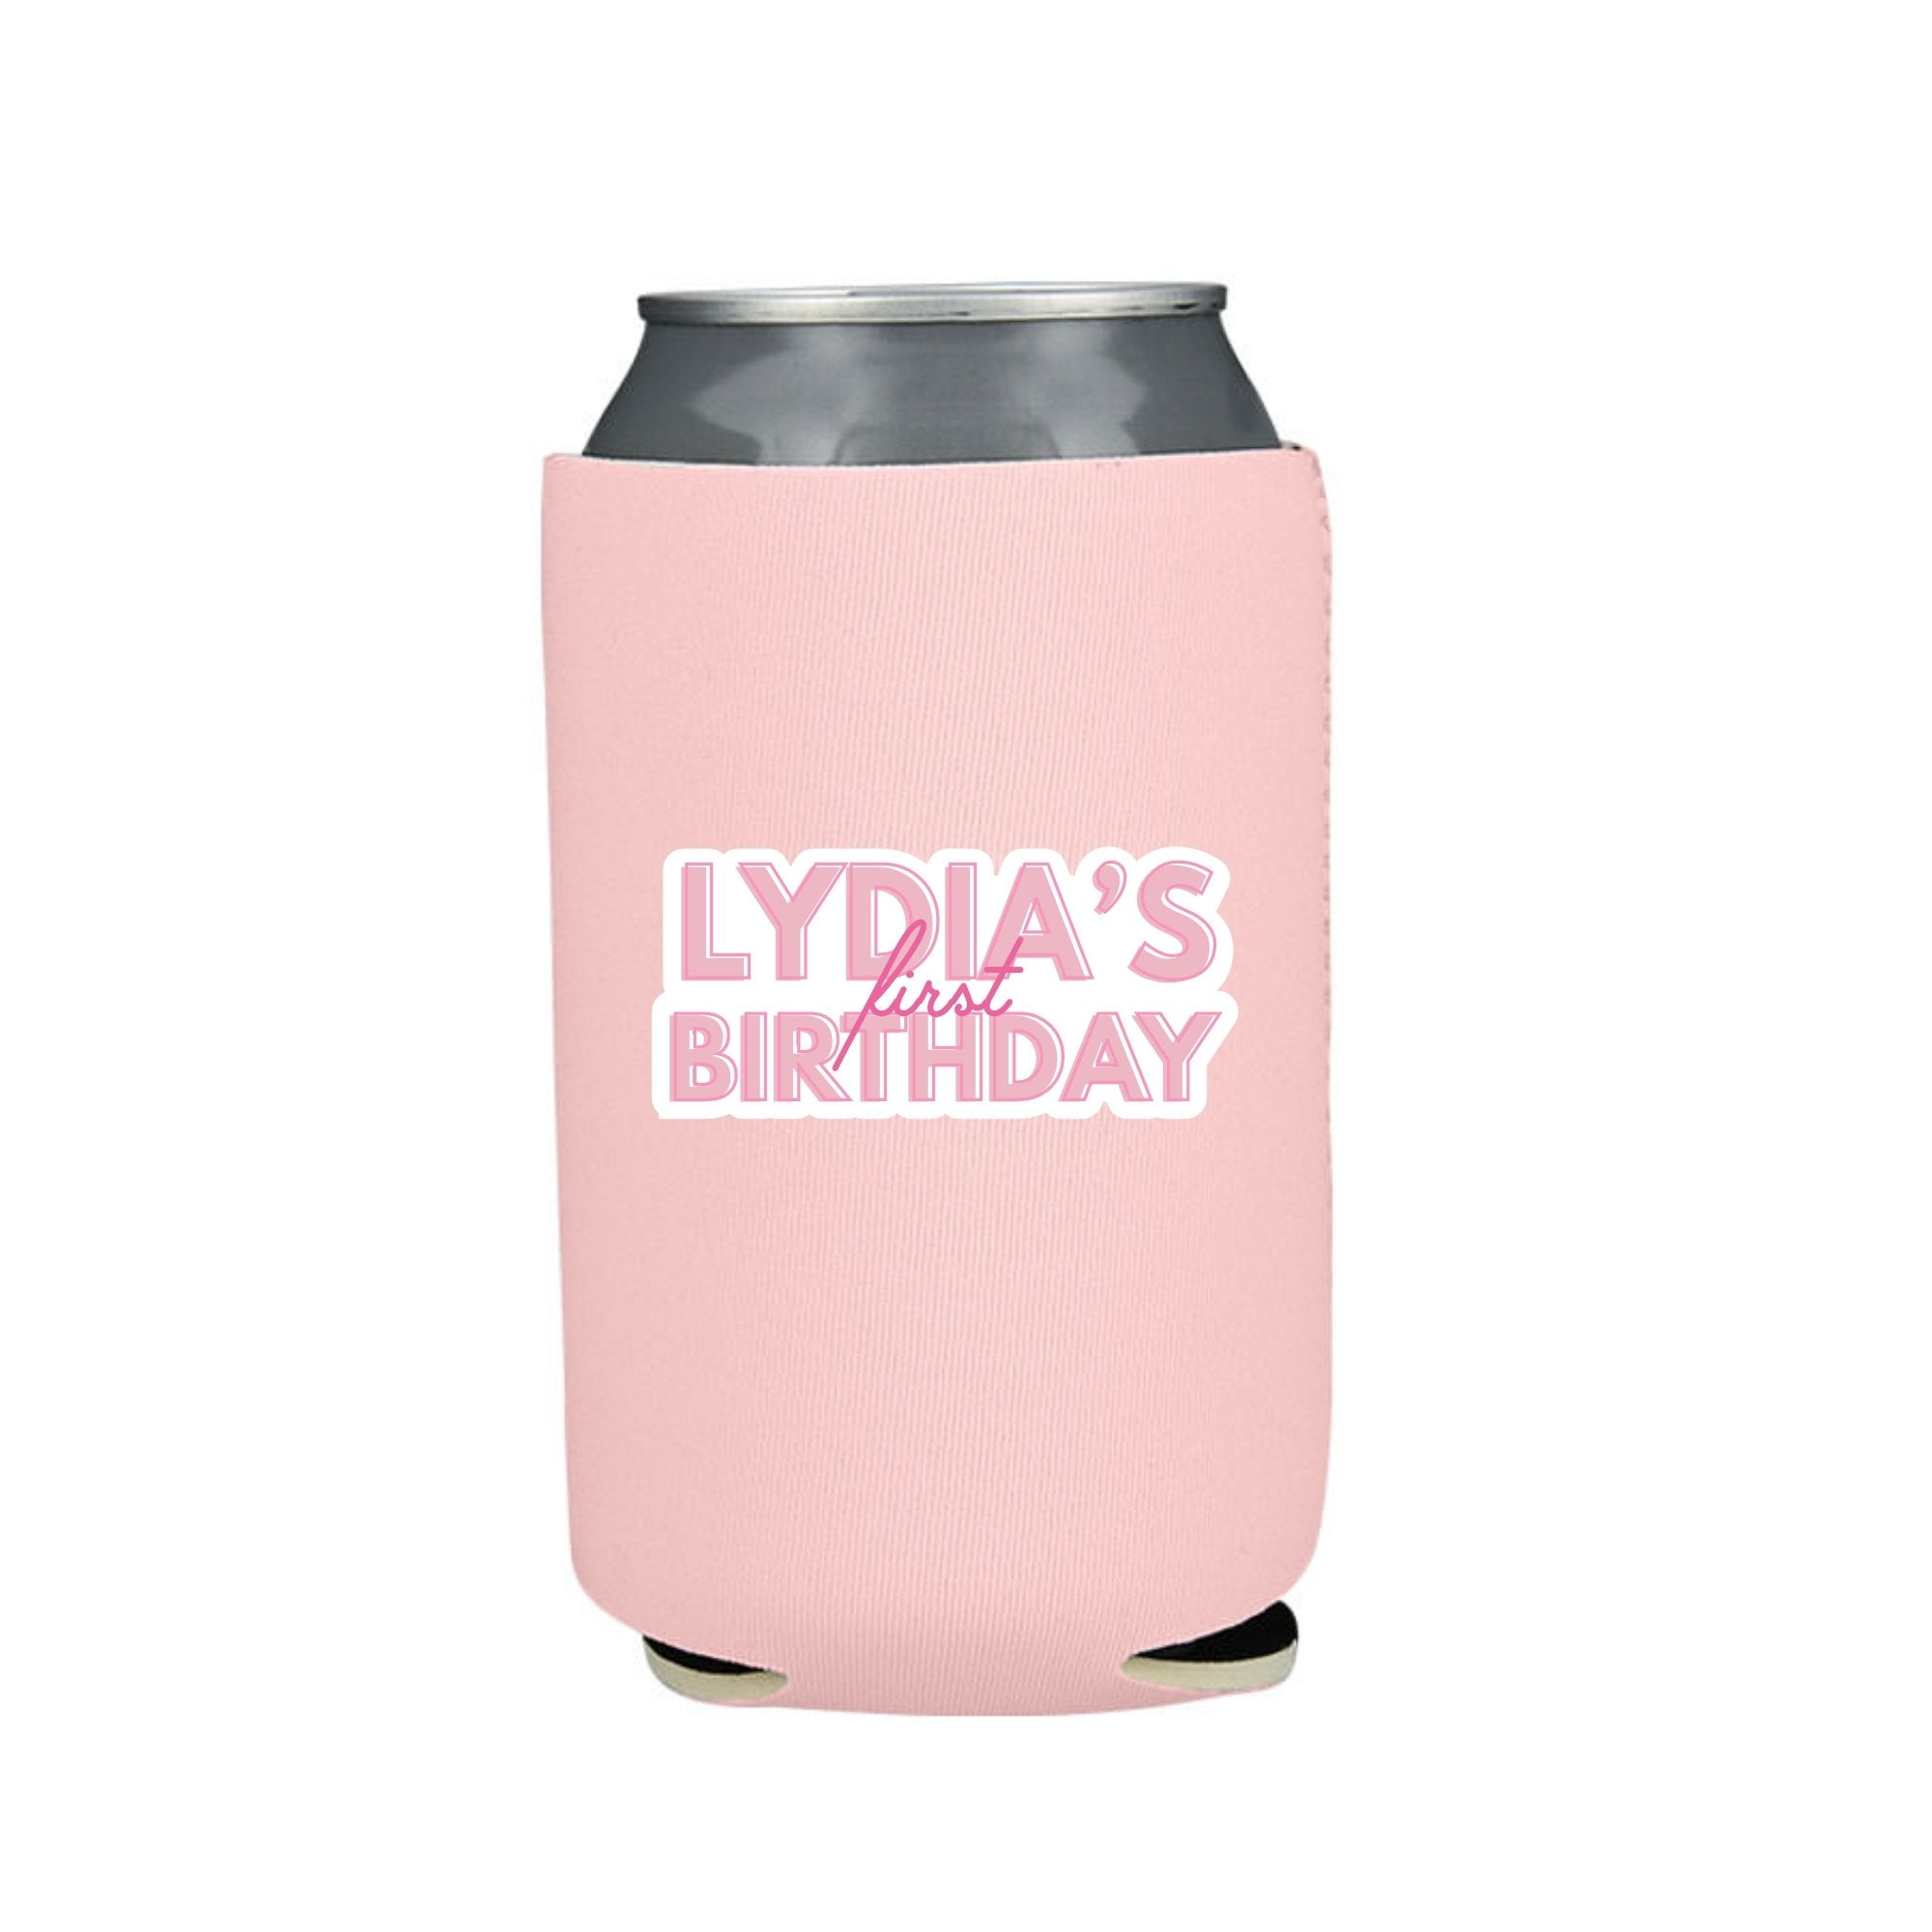 Custom Birthday Can Cooler (Set of 10) - Sprinkled With Pink #bachelorette #custom #gifts